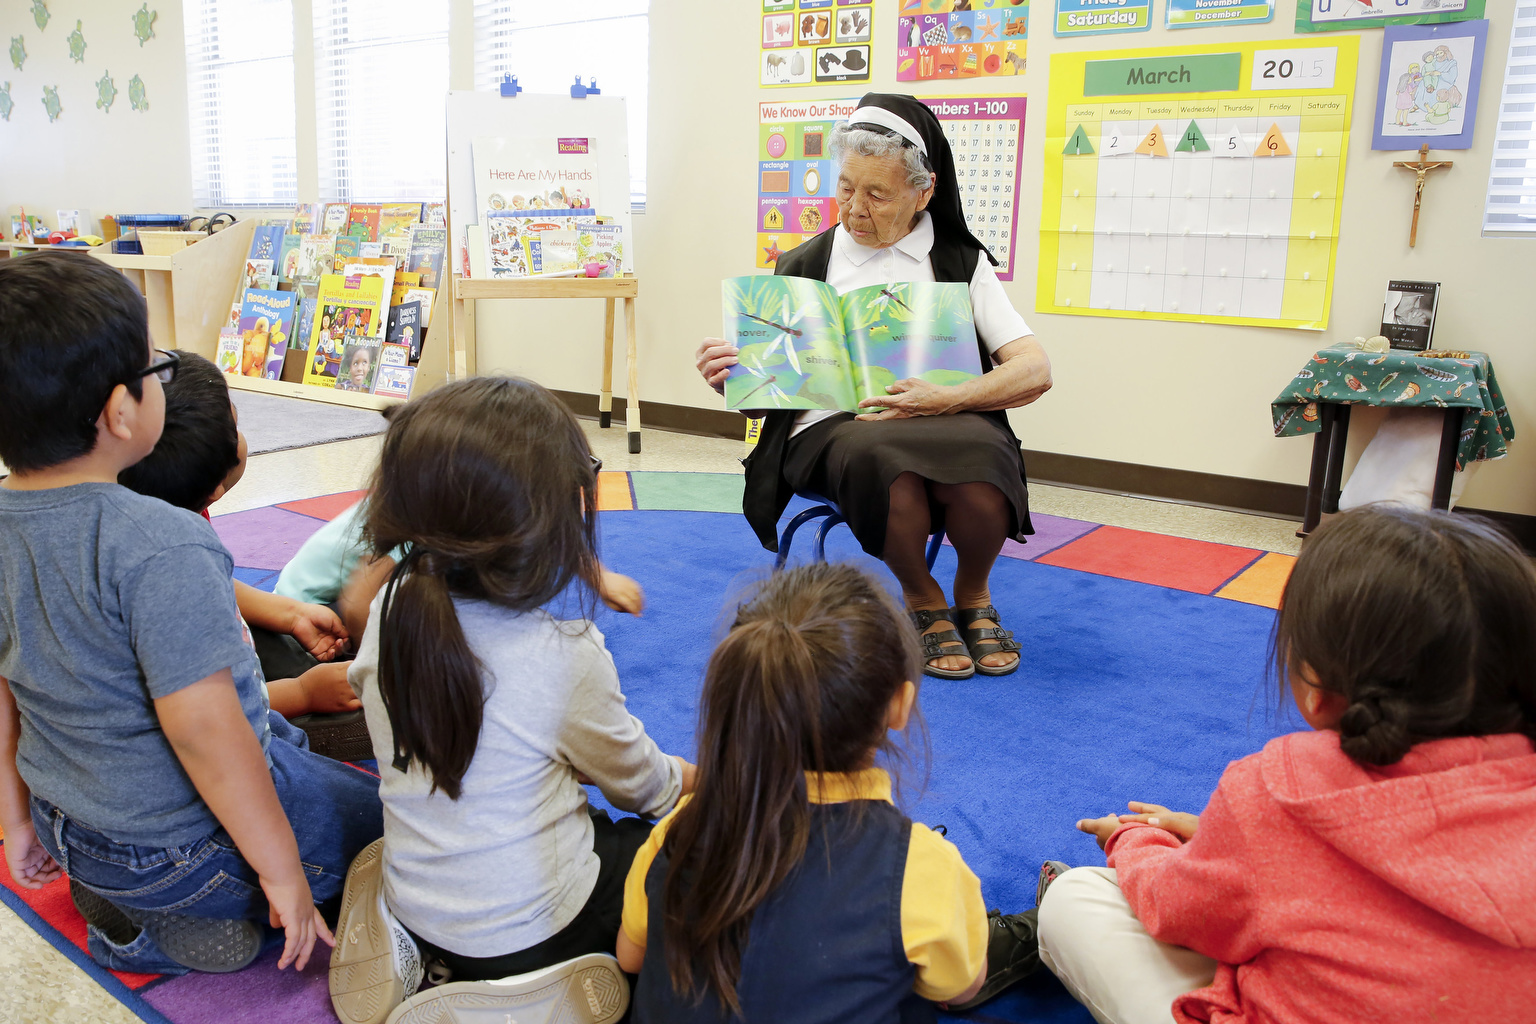 Sr. Thereselle Arruda reads to preschoolers at St. Peter Indian Mission School in Bapchule, Ariz. The Franciscan Sisters of Christian Charity have served the Gila River Indian Community since 1935. (CNS photo/Nancy Wiechec)